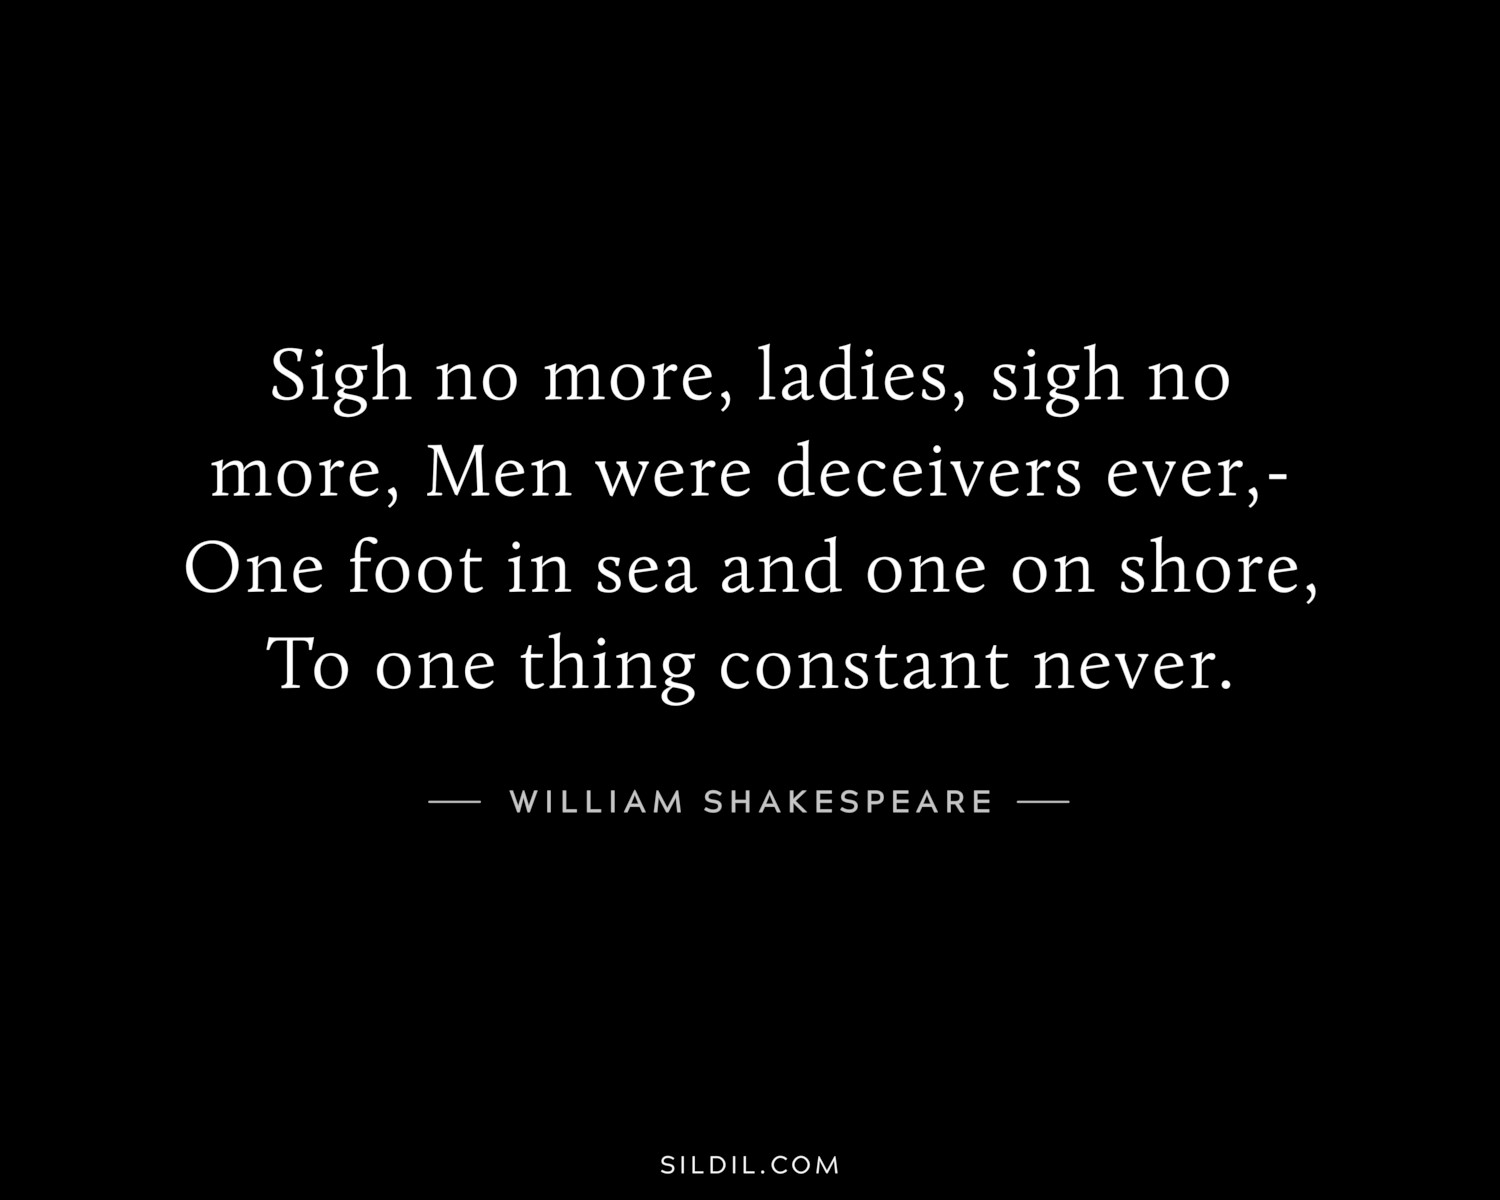 Sigh no more, ladies, sigh no more, Men were deceivers ever,- One foot in sea and one on shore, To one thing constant never.